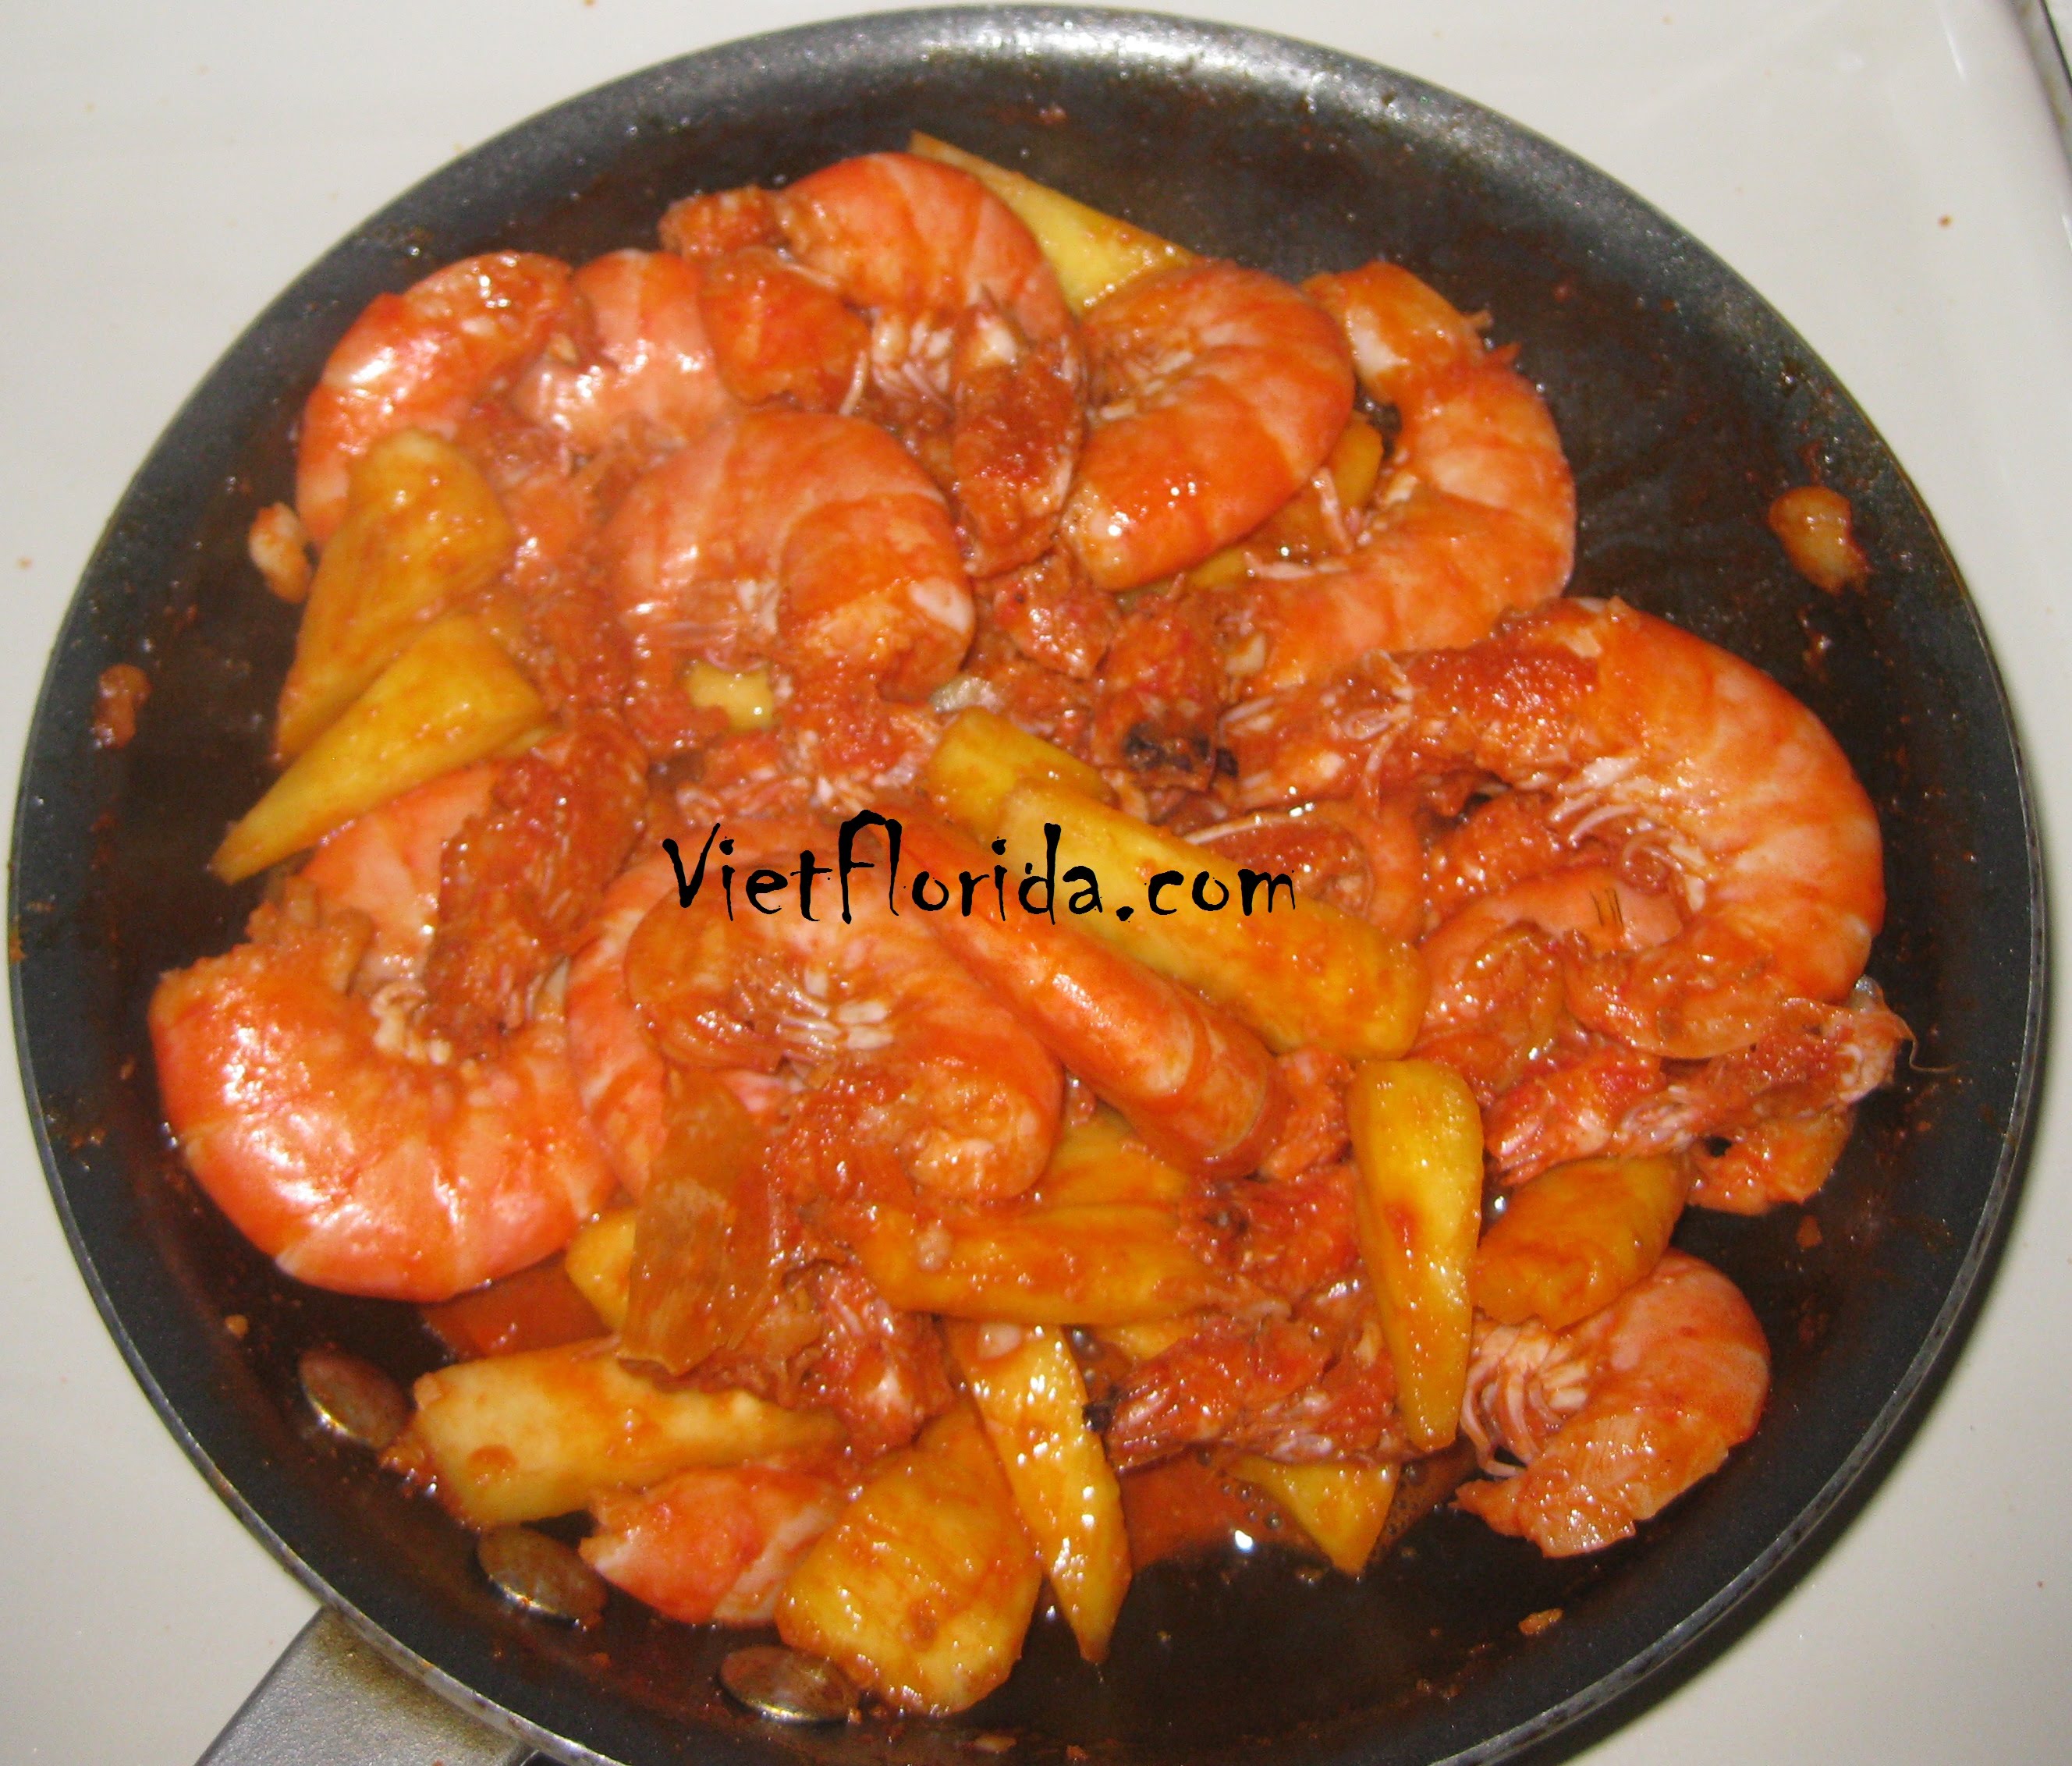 You are currently viewing Fried Shrimp with Pineapple